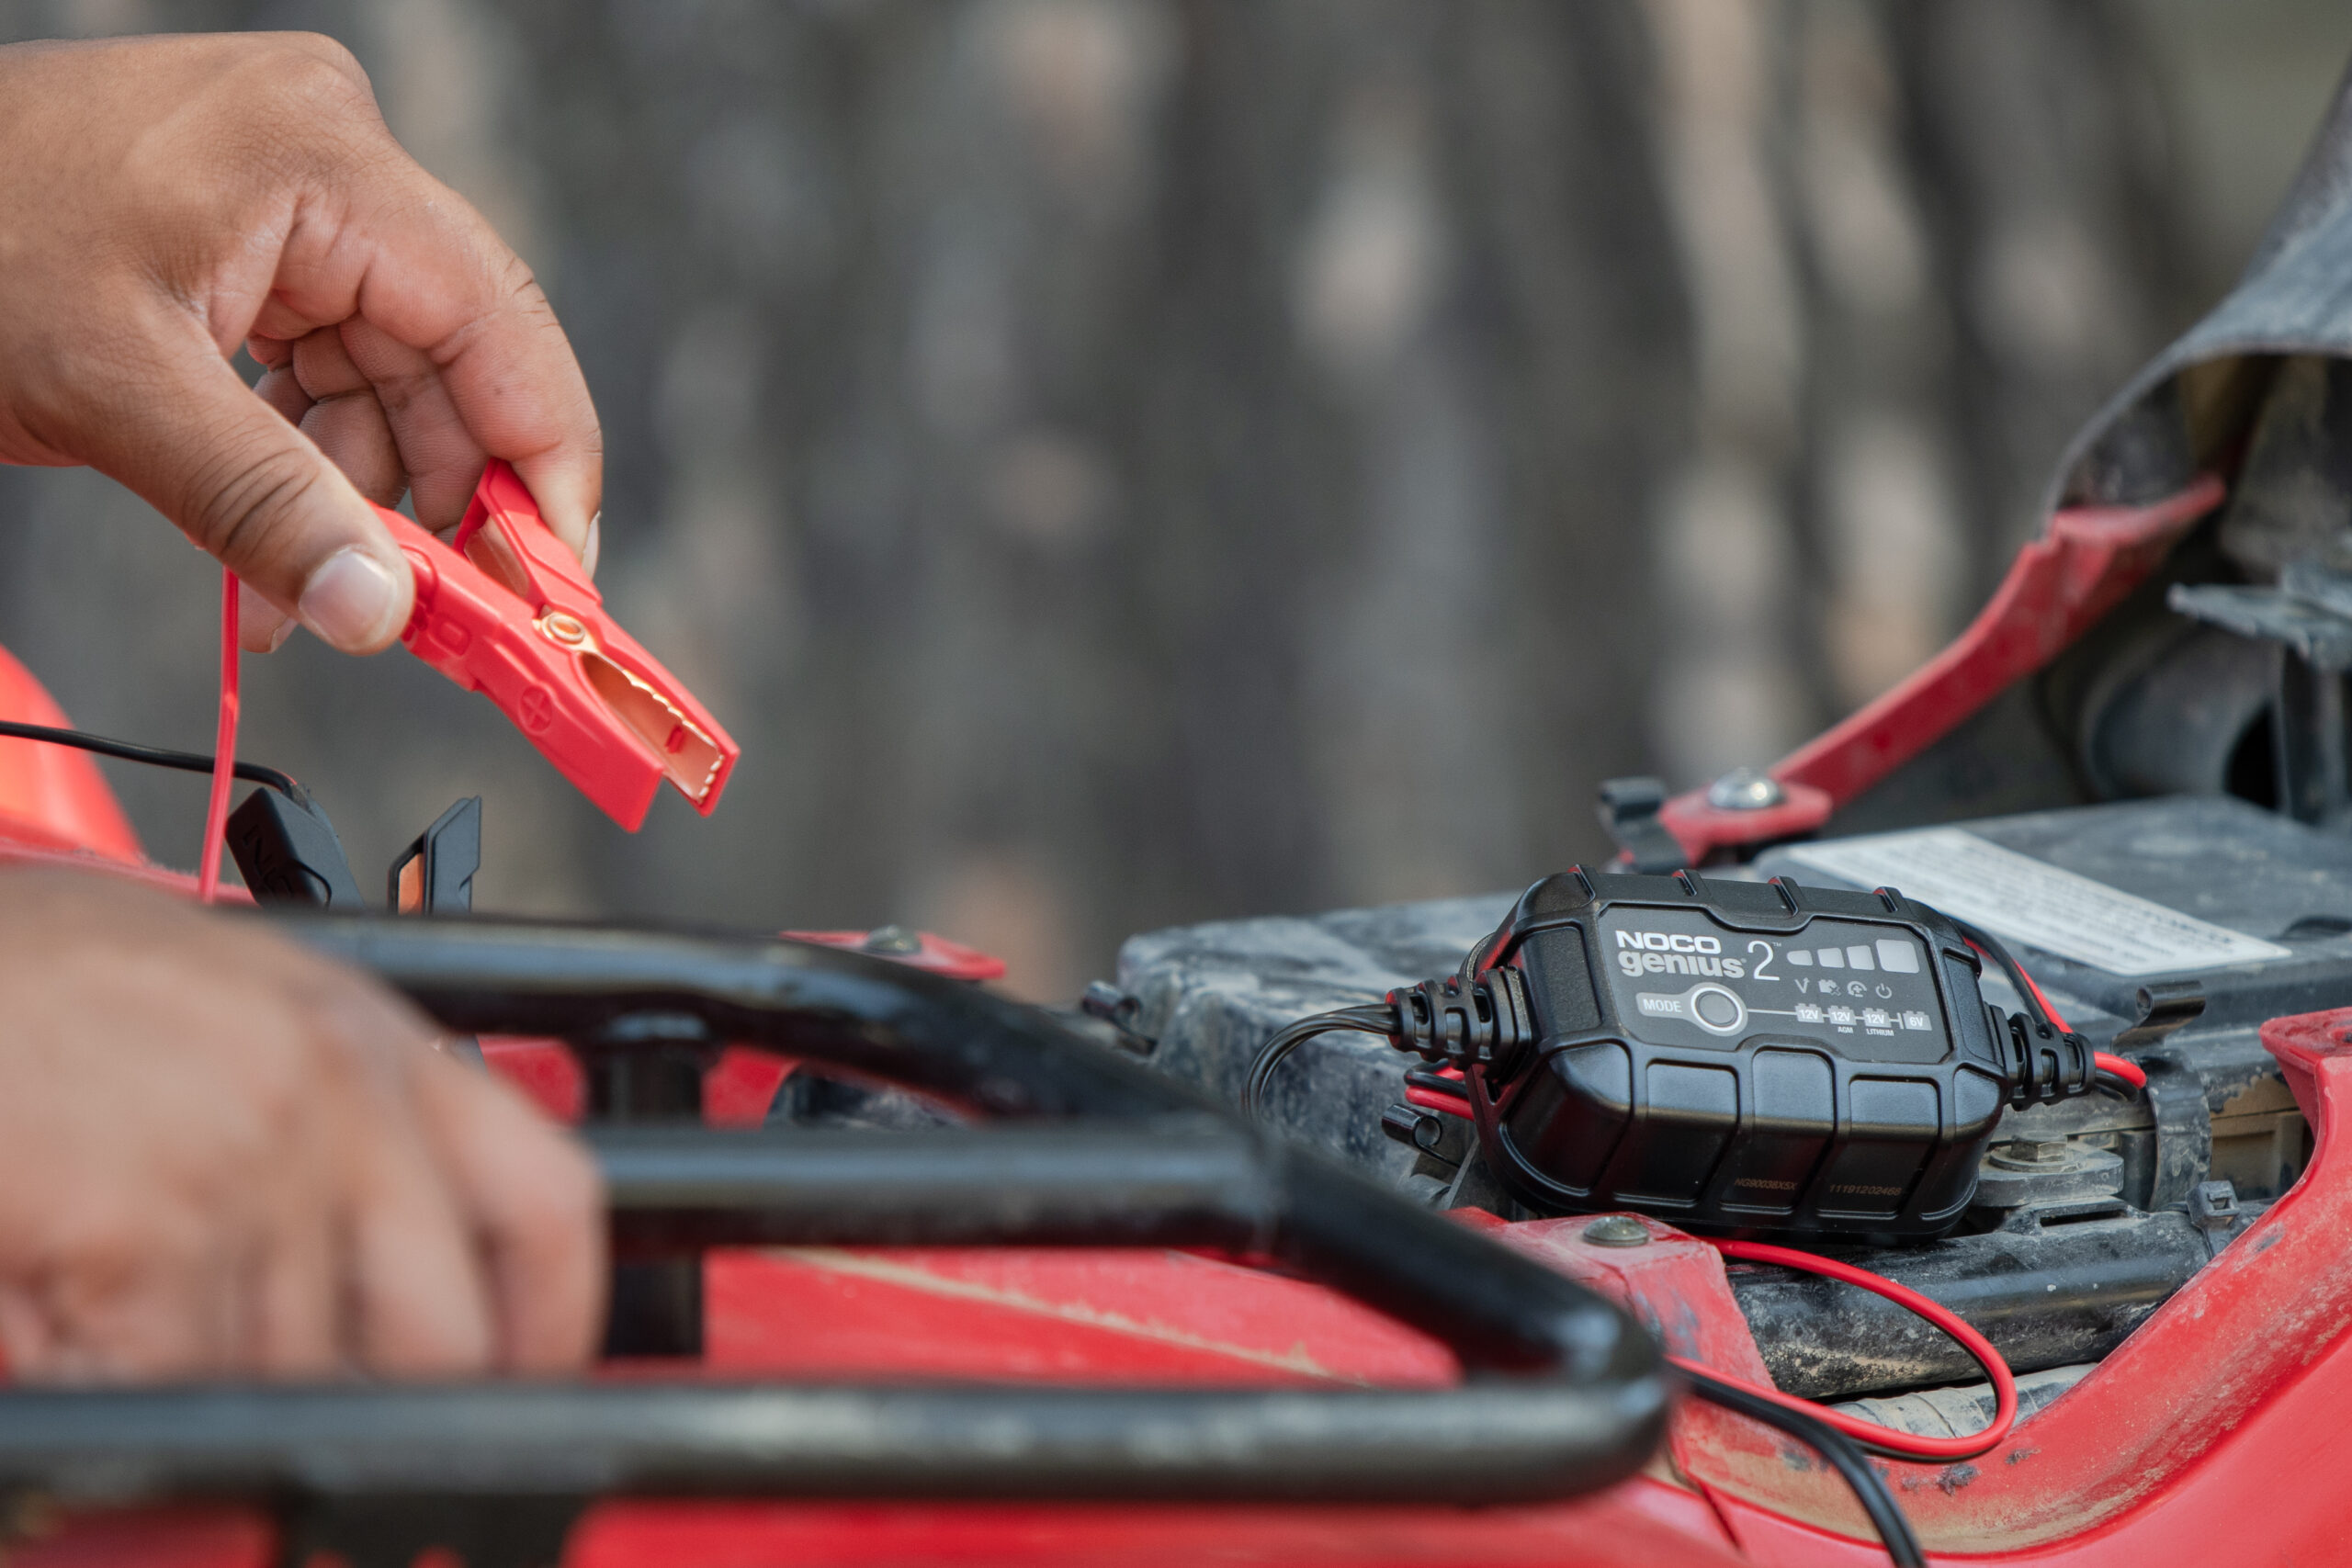 How Does a NOCO Portable Jump Starter Work? - AutoZone